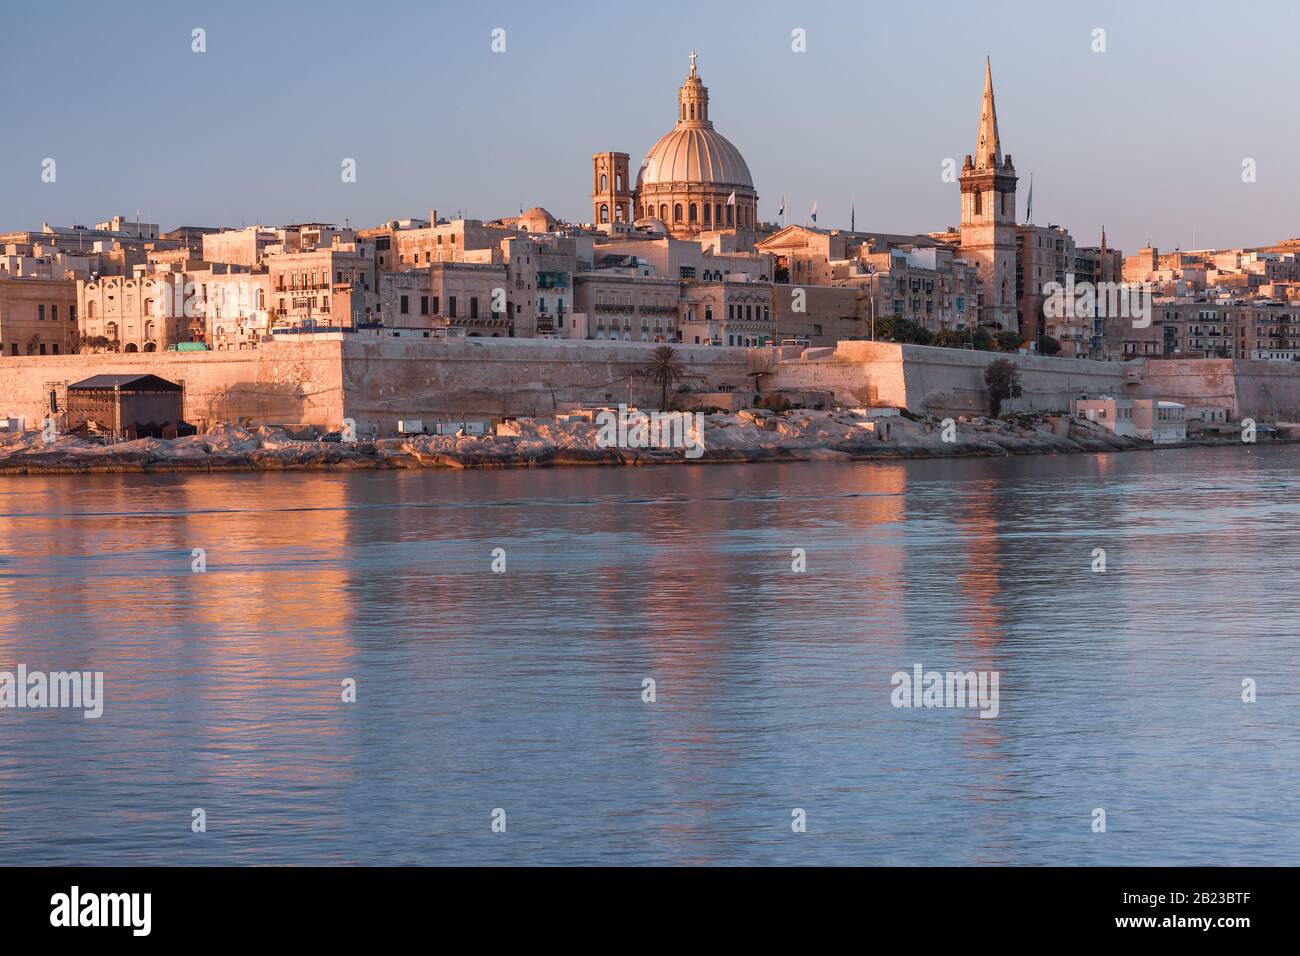 Valletta with Our Lady of Mount Carmel church and St. Paul's Anglican Pro-Cathedral at sunrise as seen from Sliema, Valletta, Malta Stock Photo